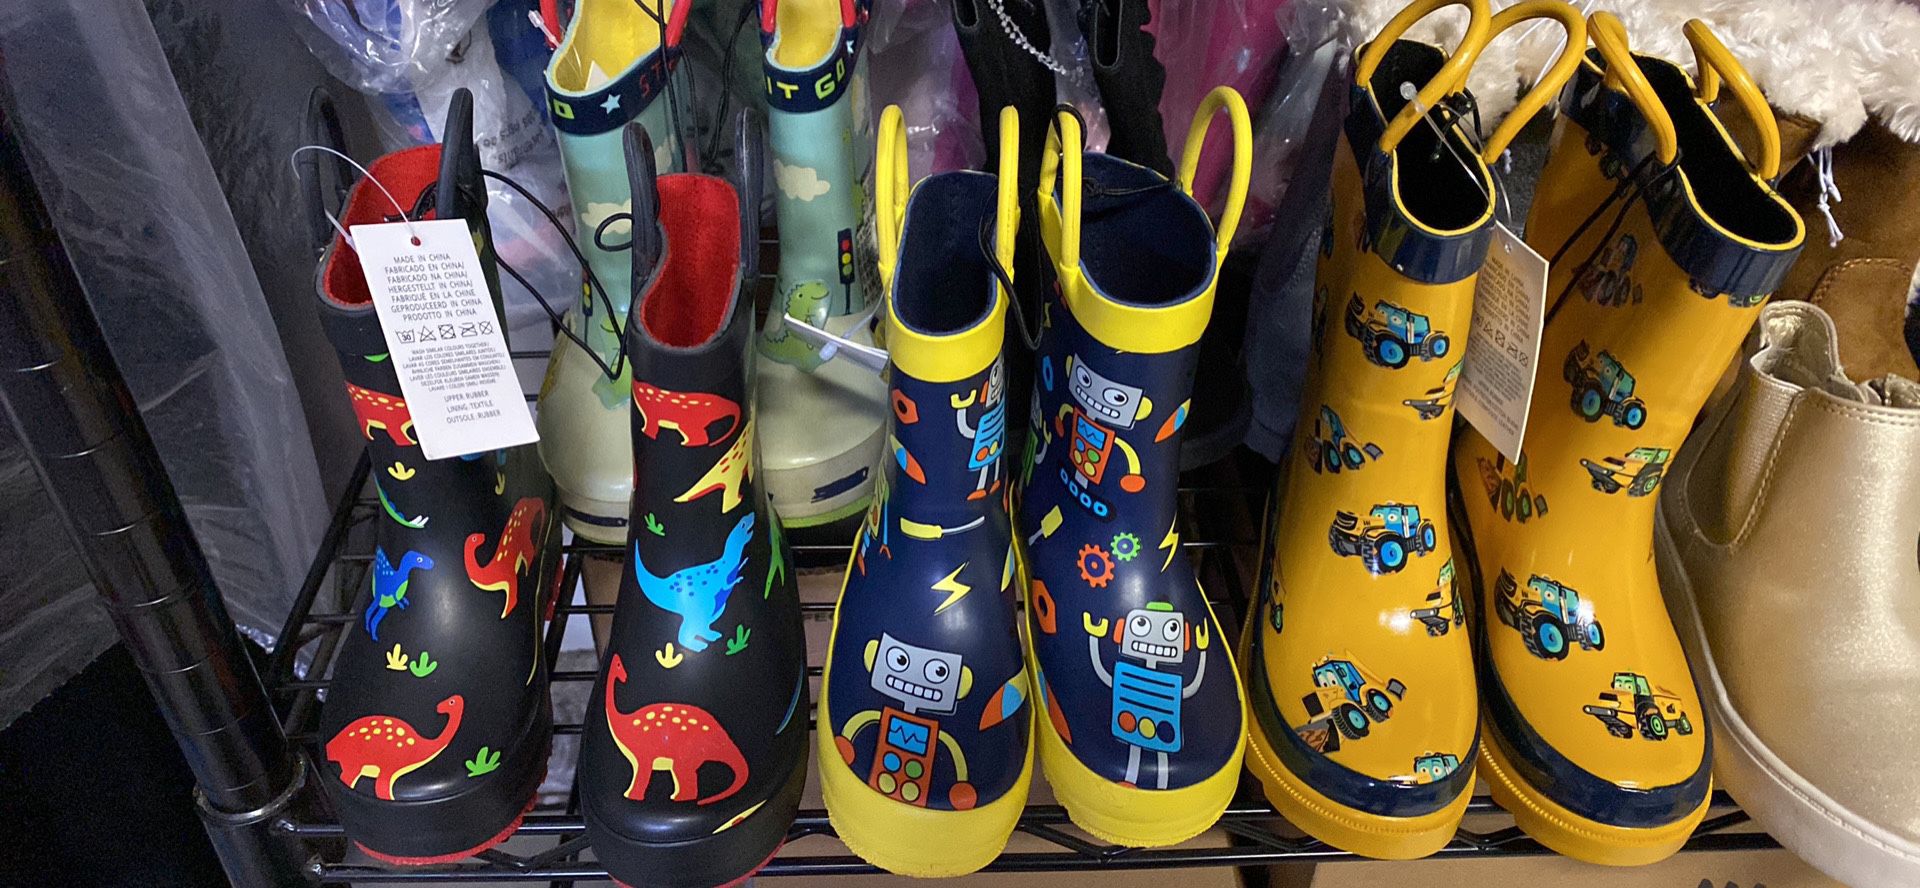 New Rain Boots For Girls And Boys Only Size 5 For Toddlers .